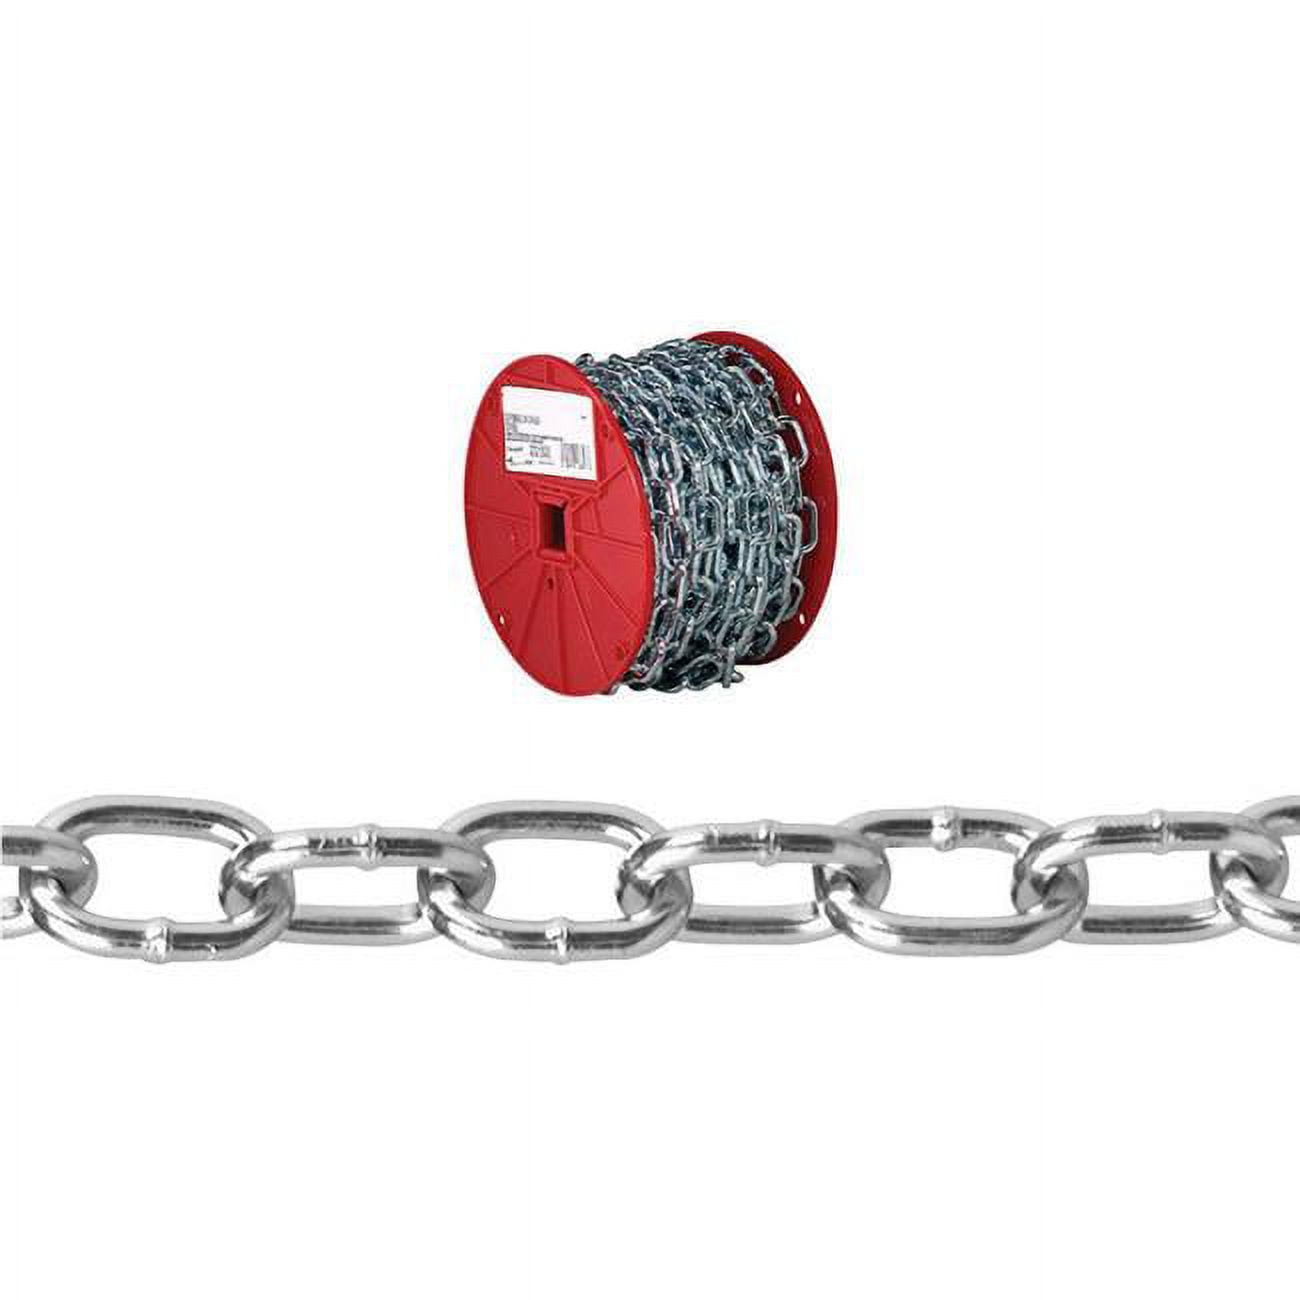 5006123 2-0 Passing Link Carbon Steel Chain, 0.18 In. Dia. X 50 Ft. - Gray